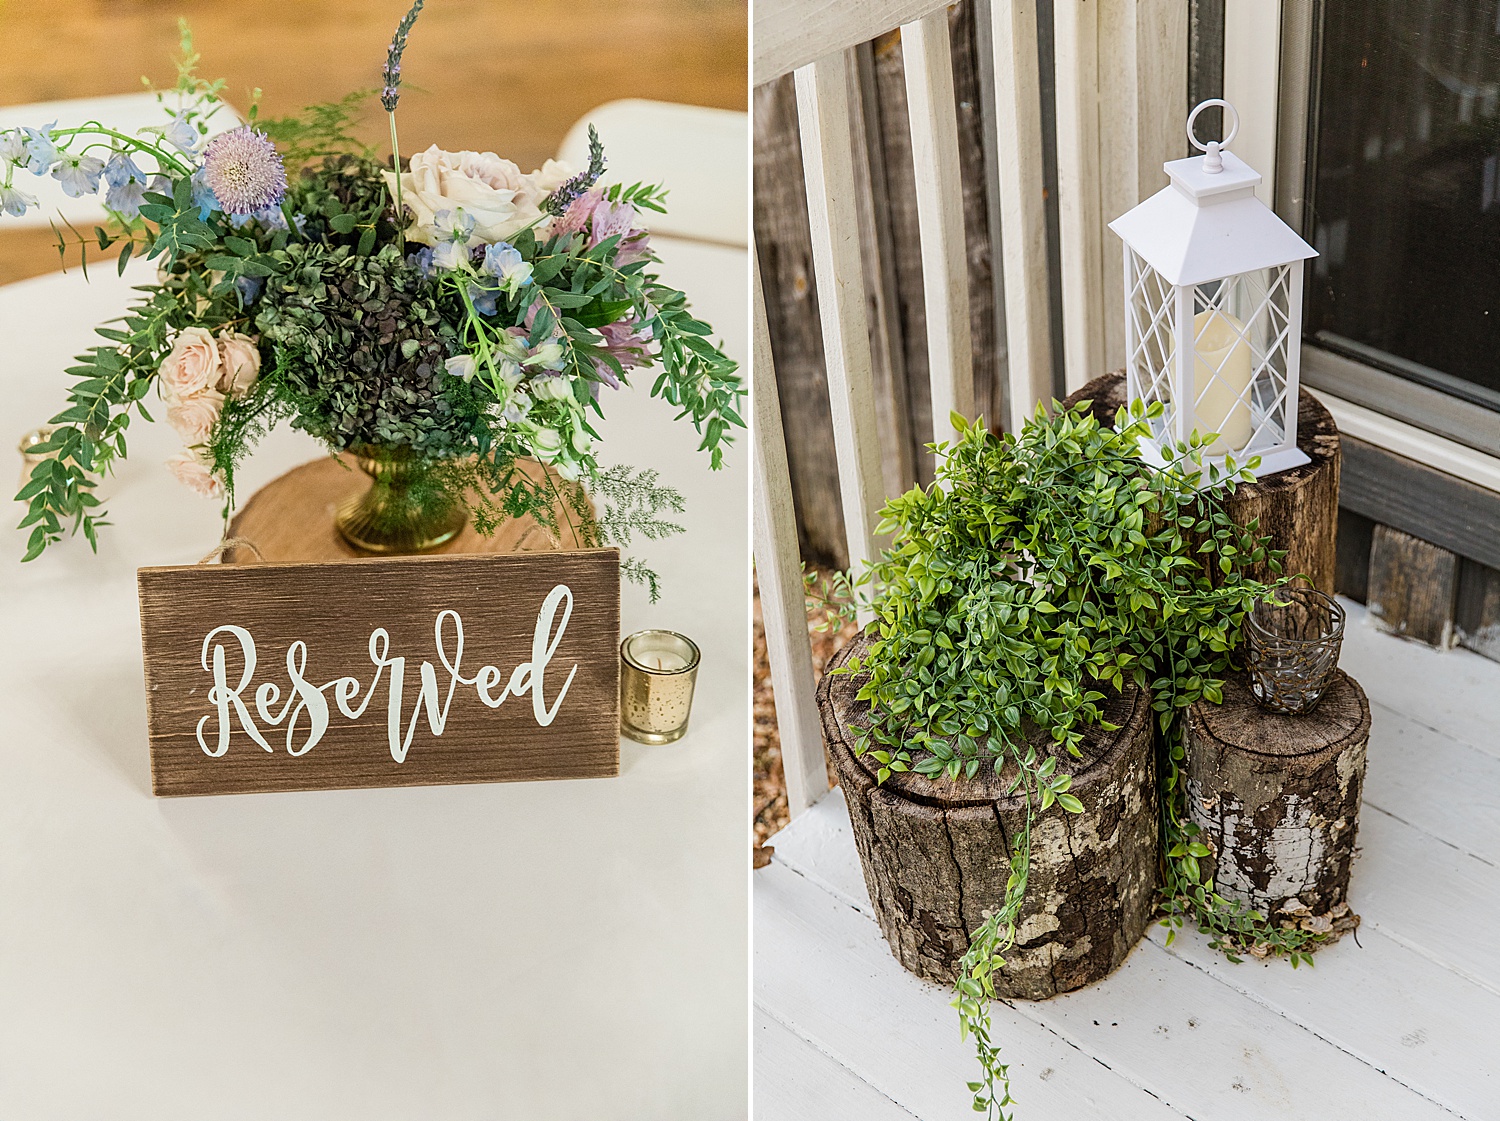 wedding details-plants and signs from Alabama Applewood farms wedding